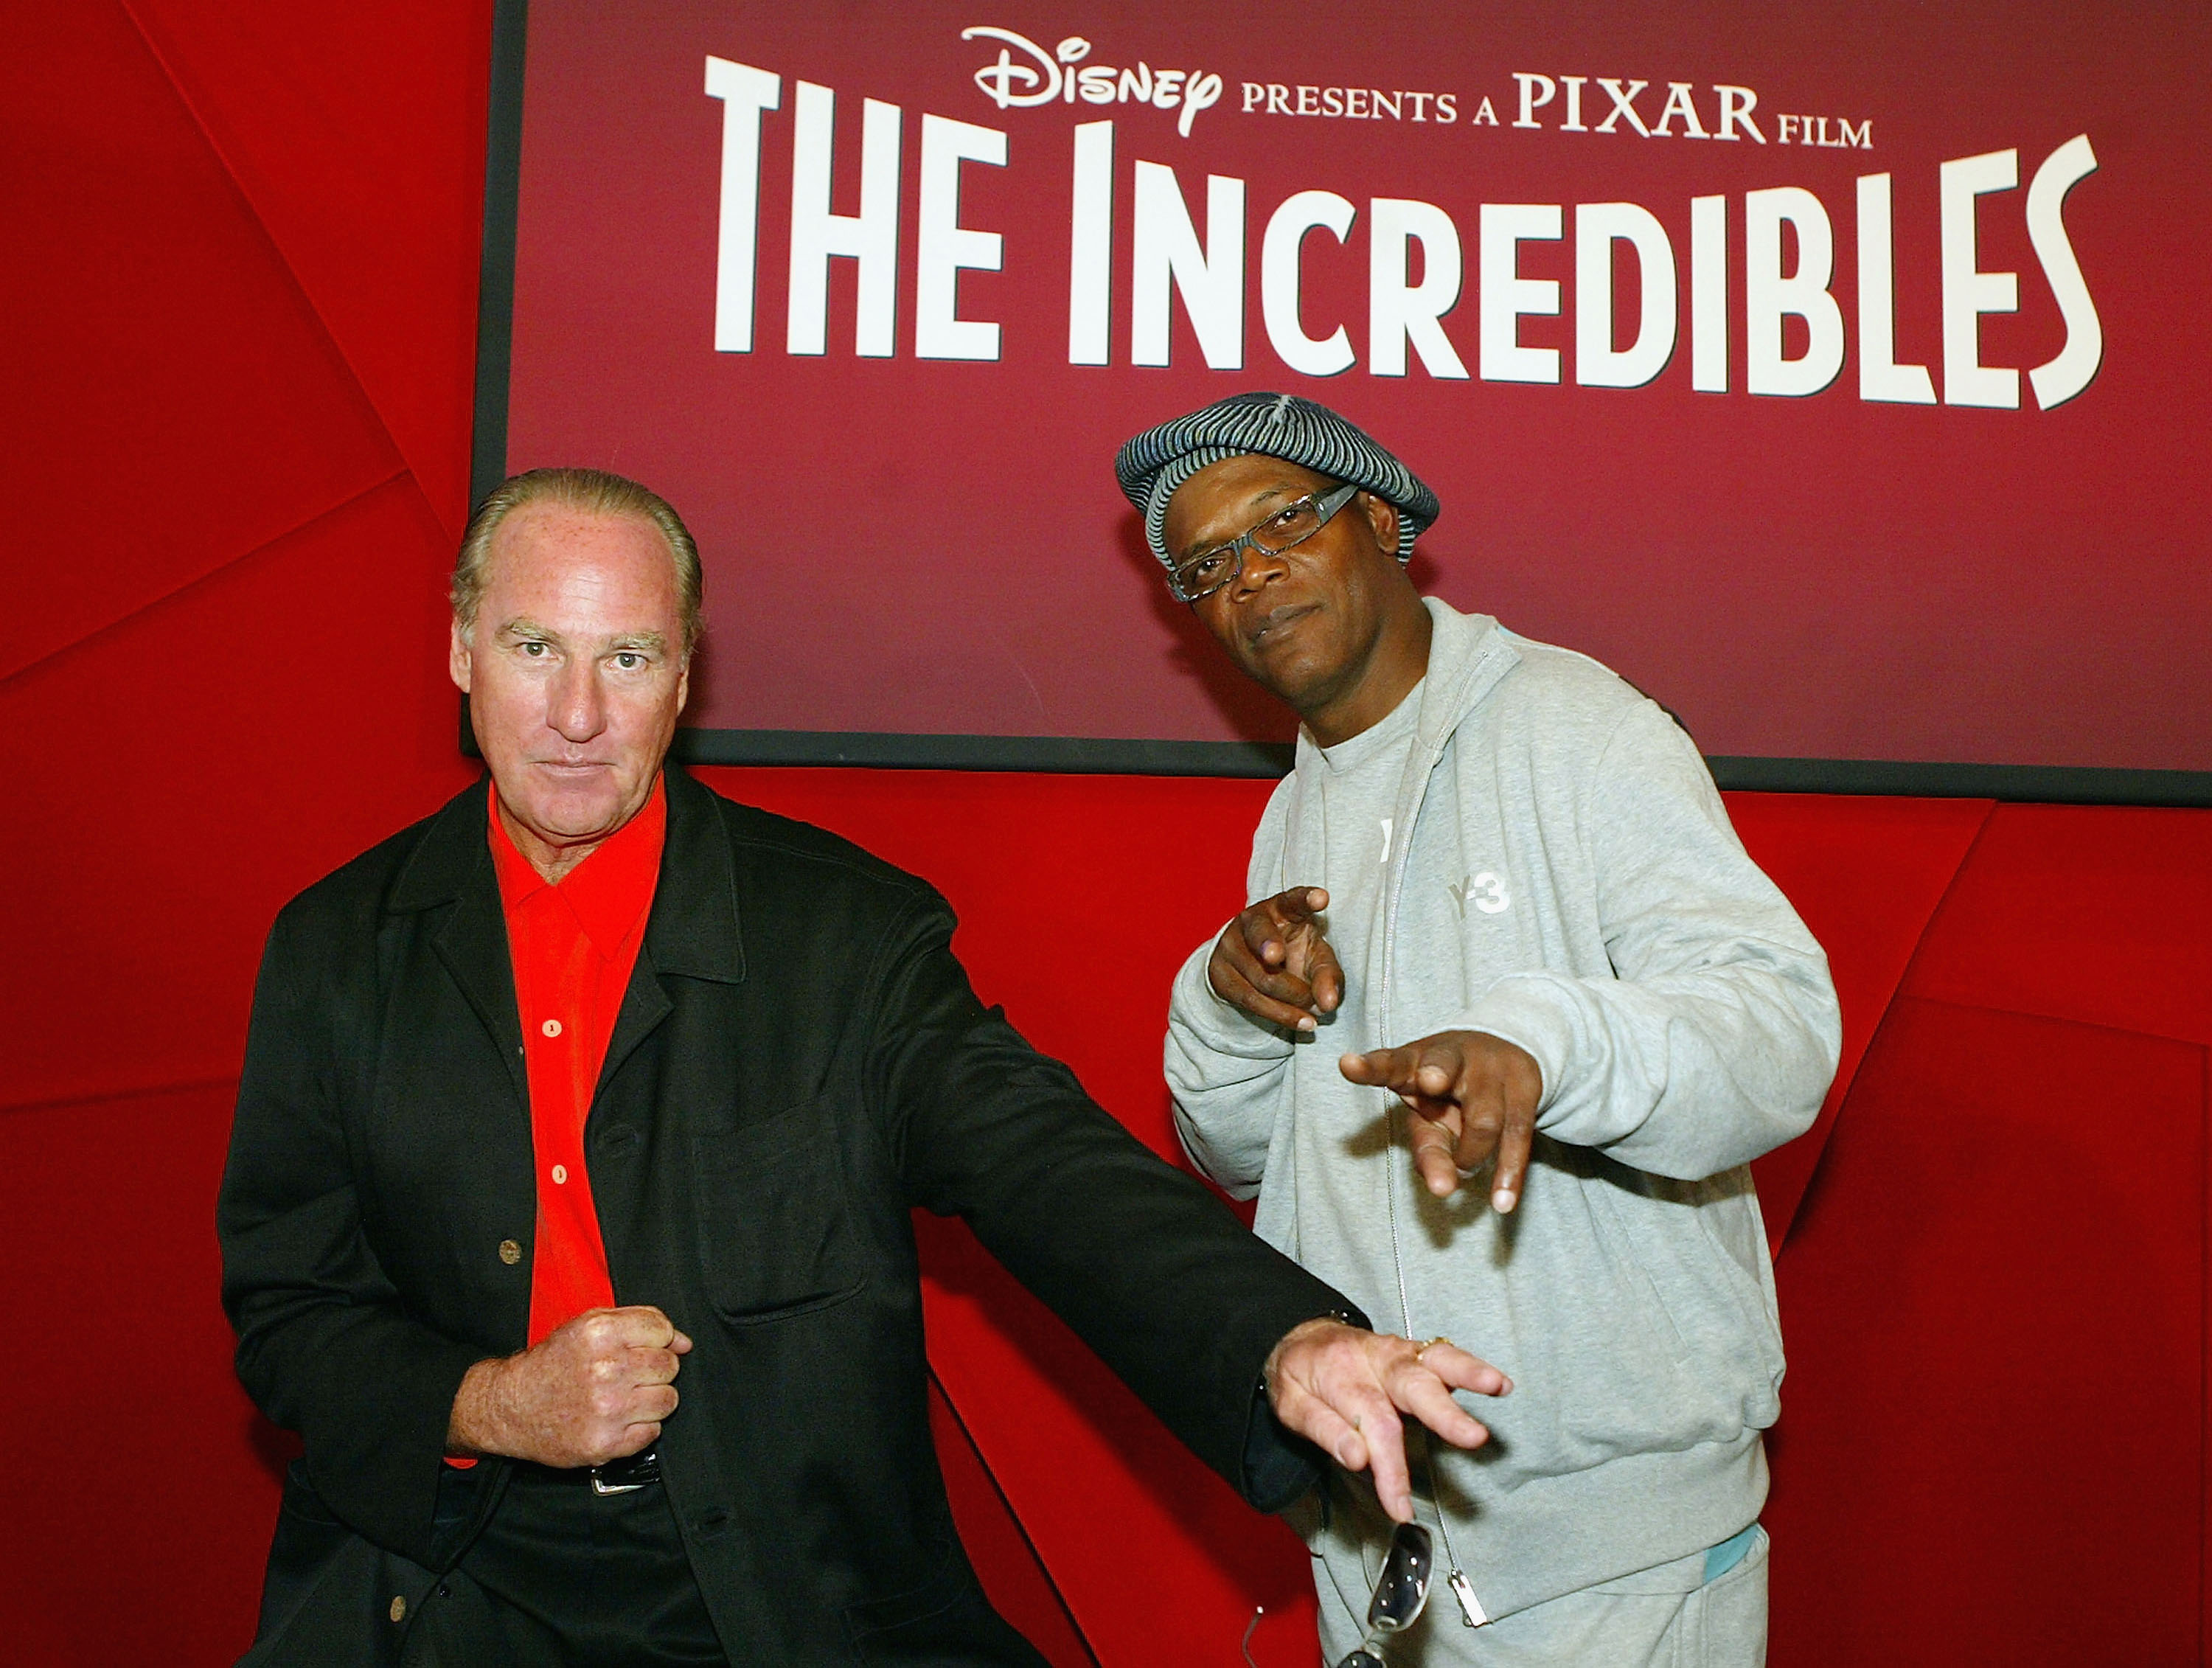 Craig T. Nelson and Samuel L. Jackson arrive at the premiere of "The Incredibles," 2004 | Source: Getty Images